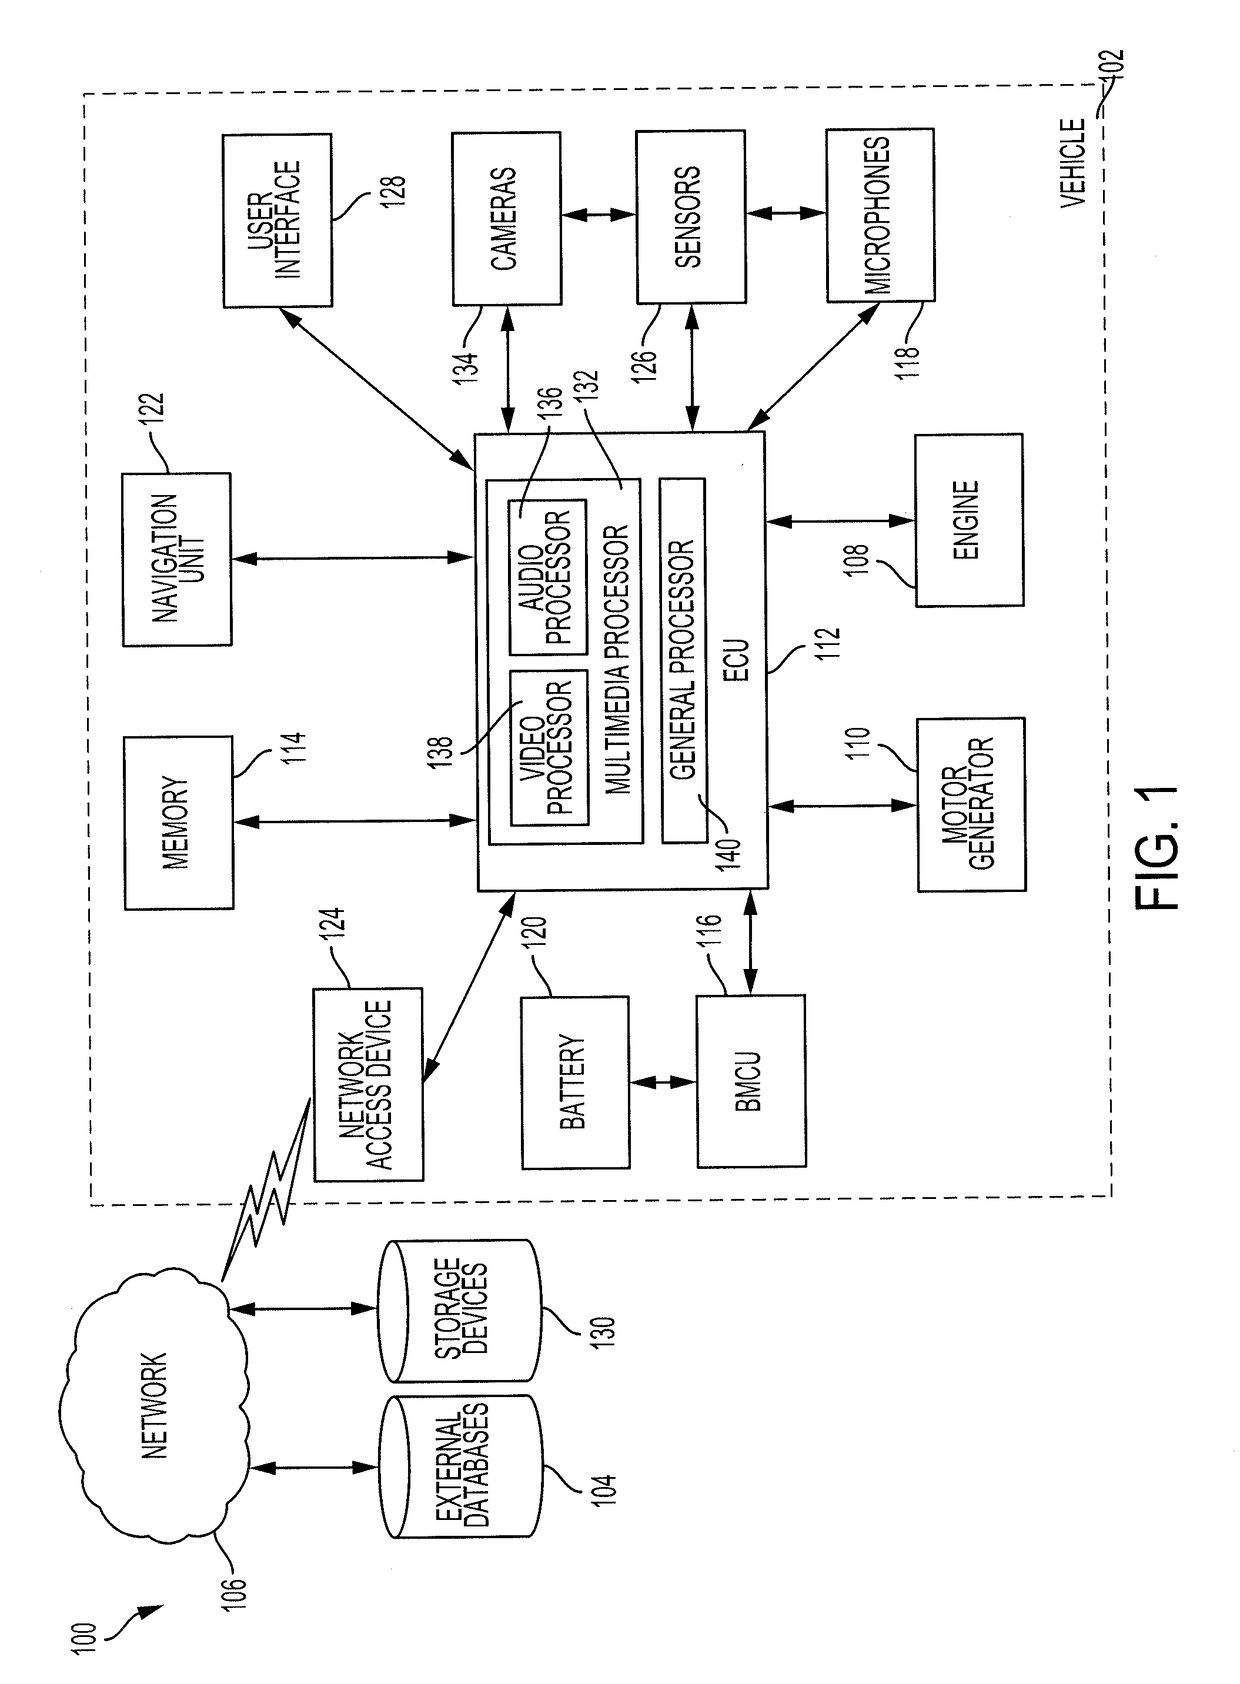 System and method for multimedia capture